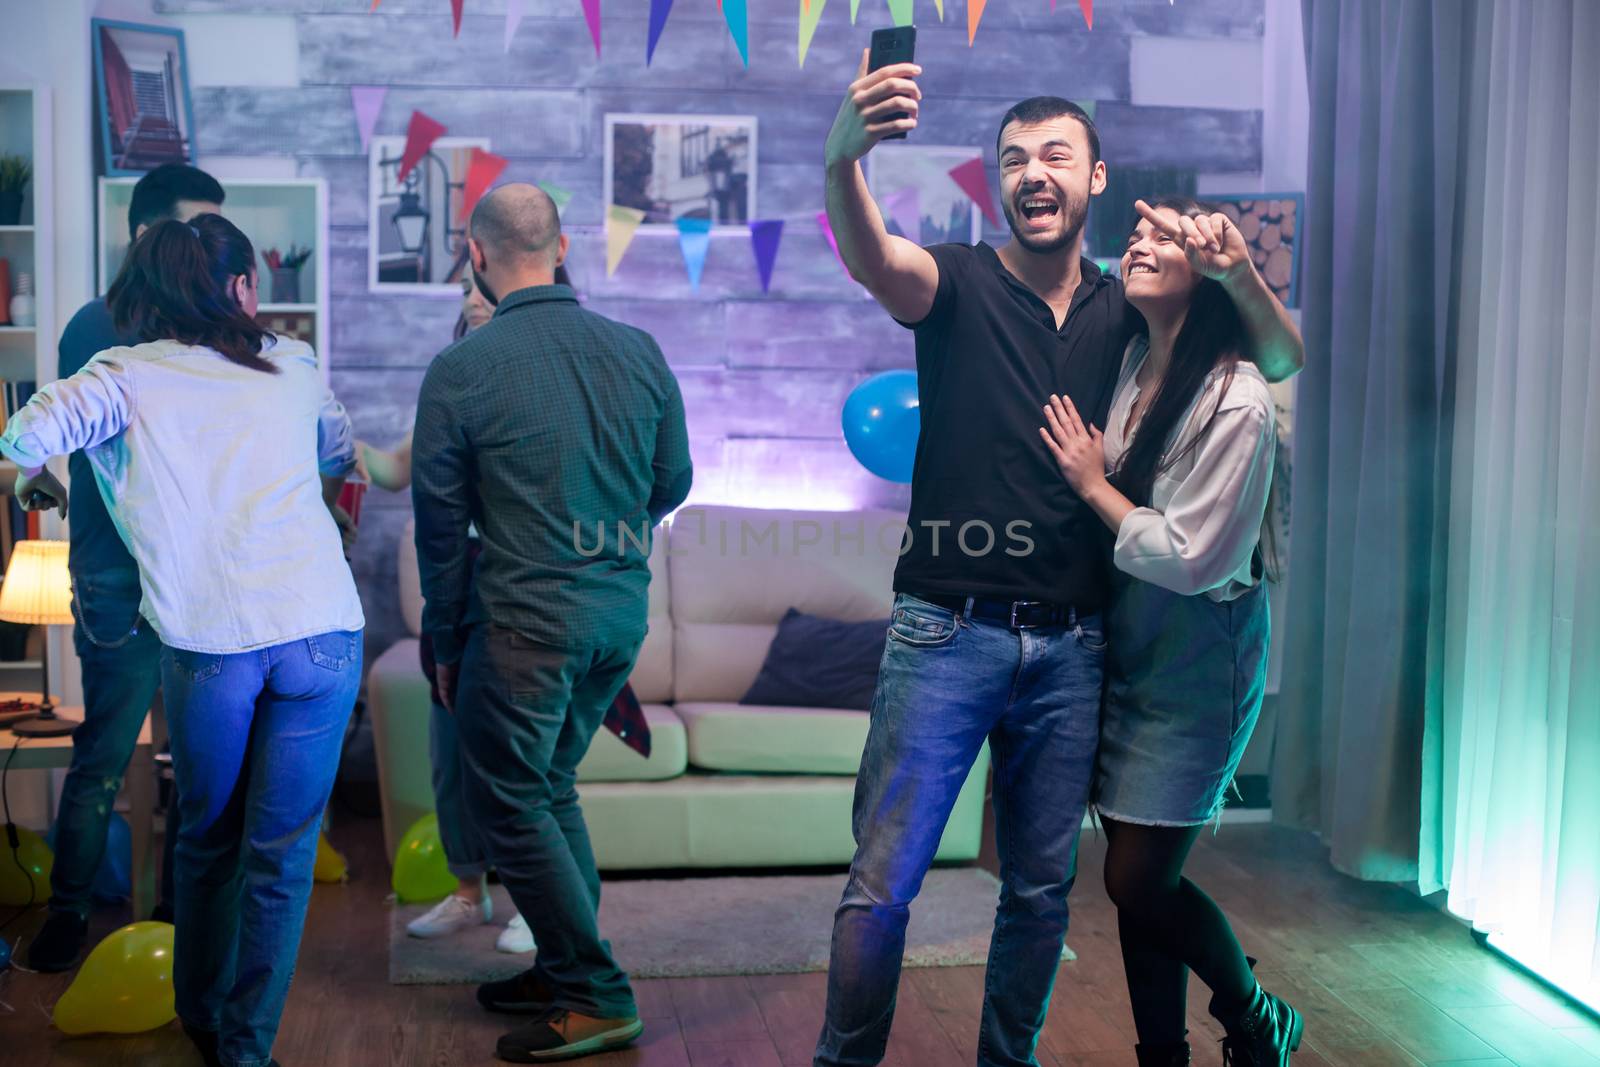 Group of young people dancing at a party while man and woman taking a selfie.